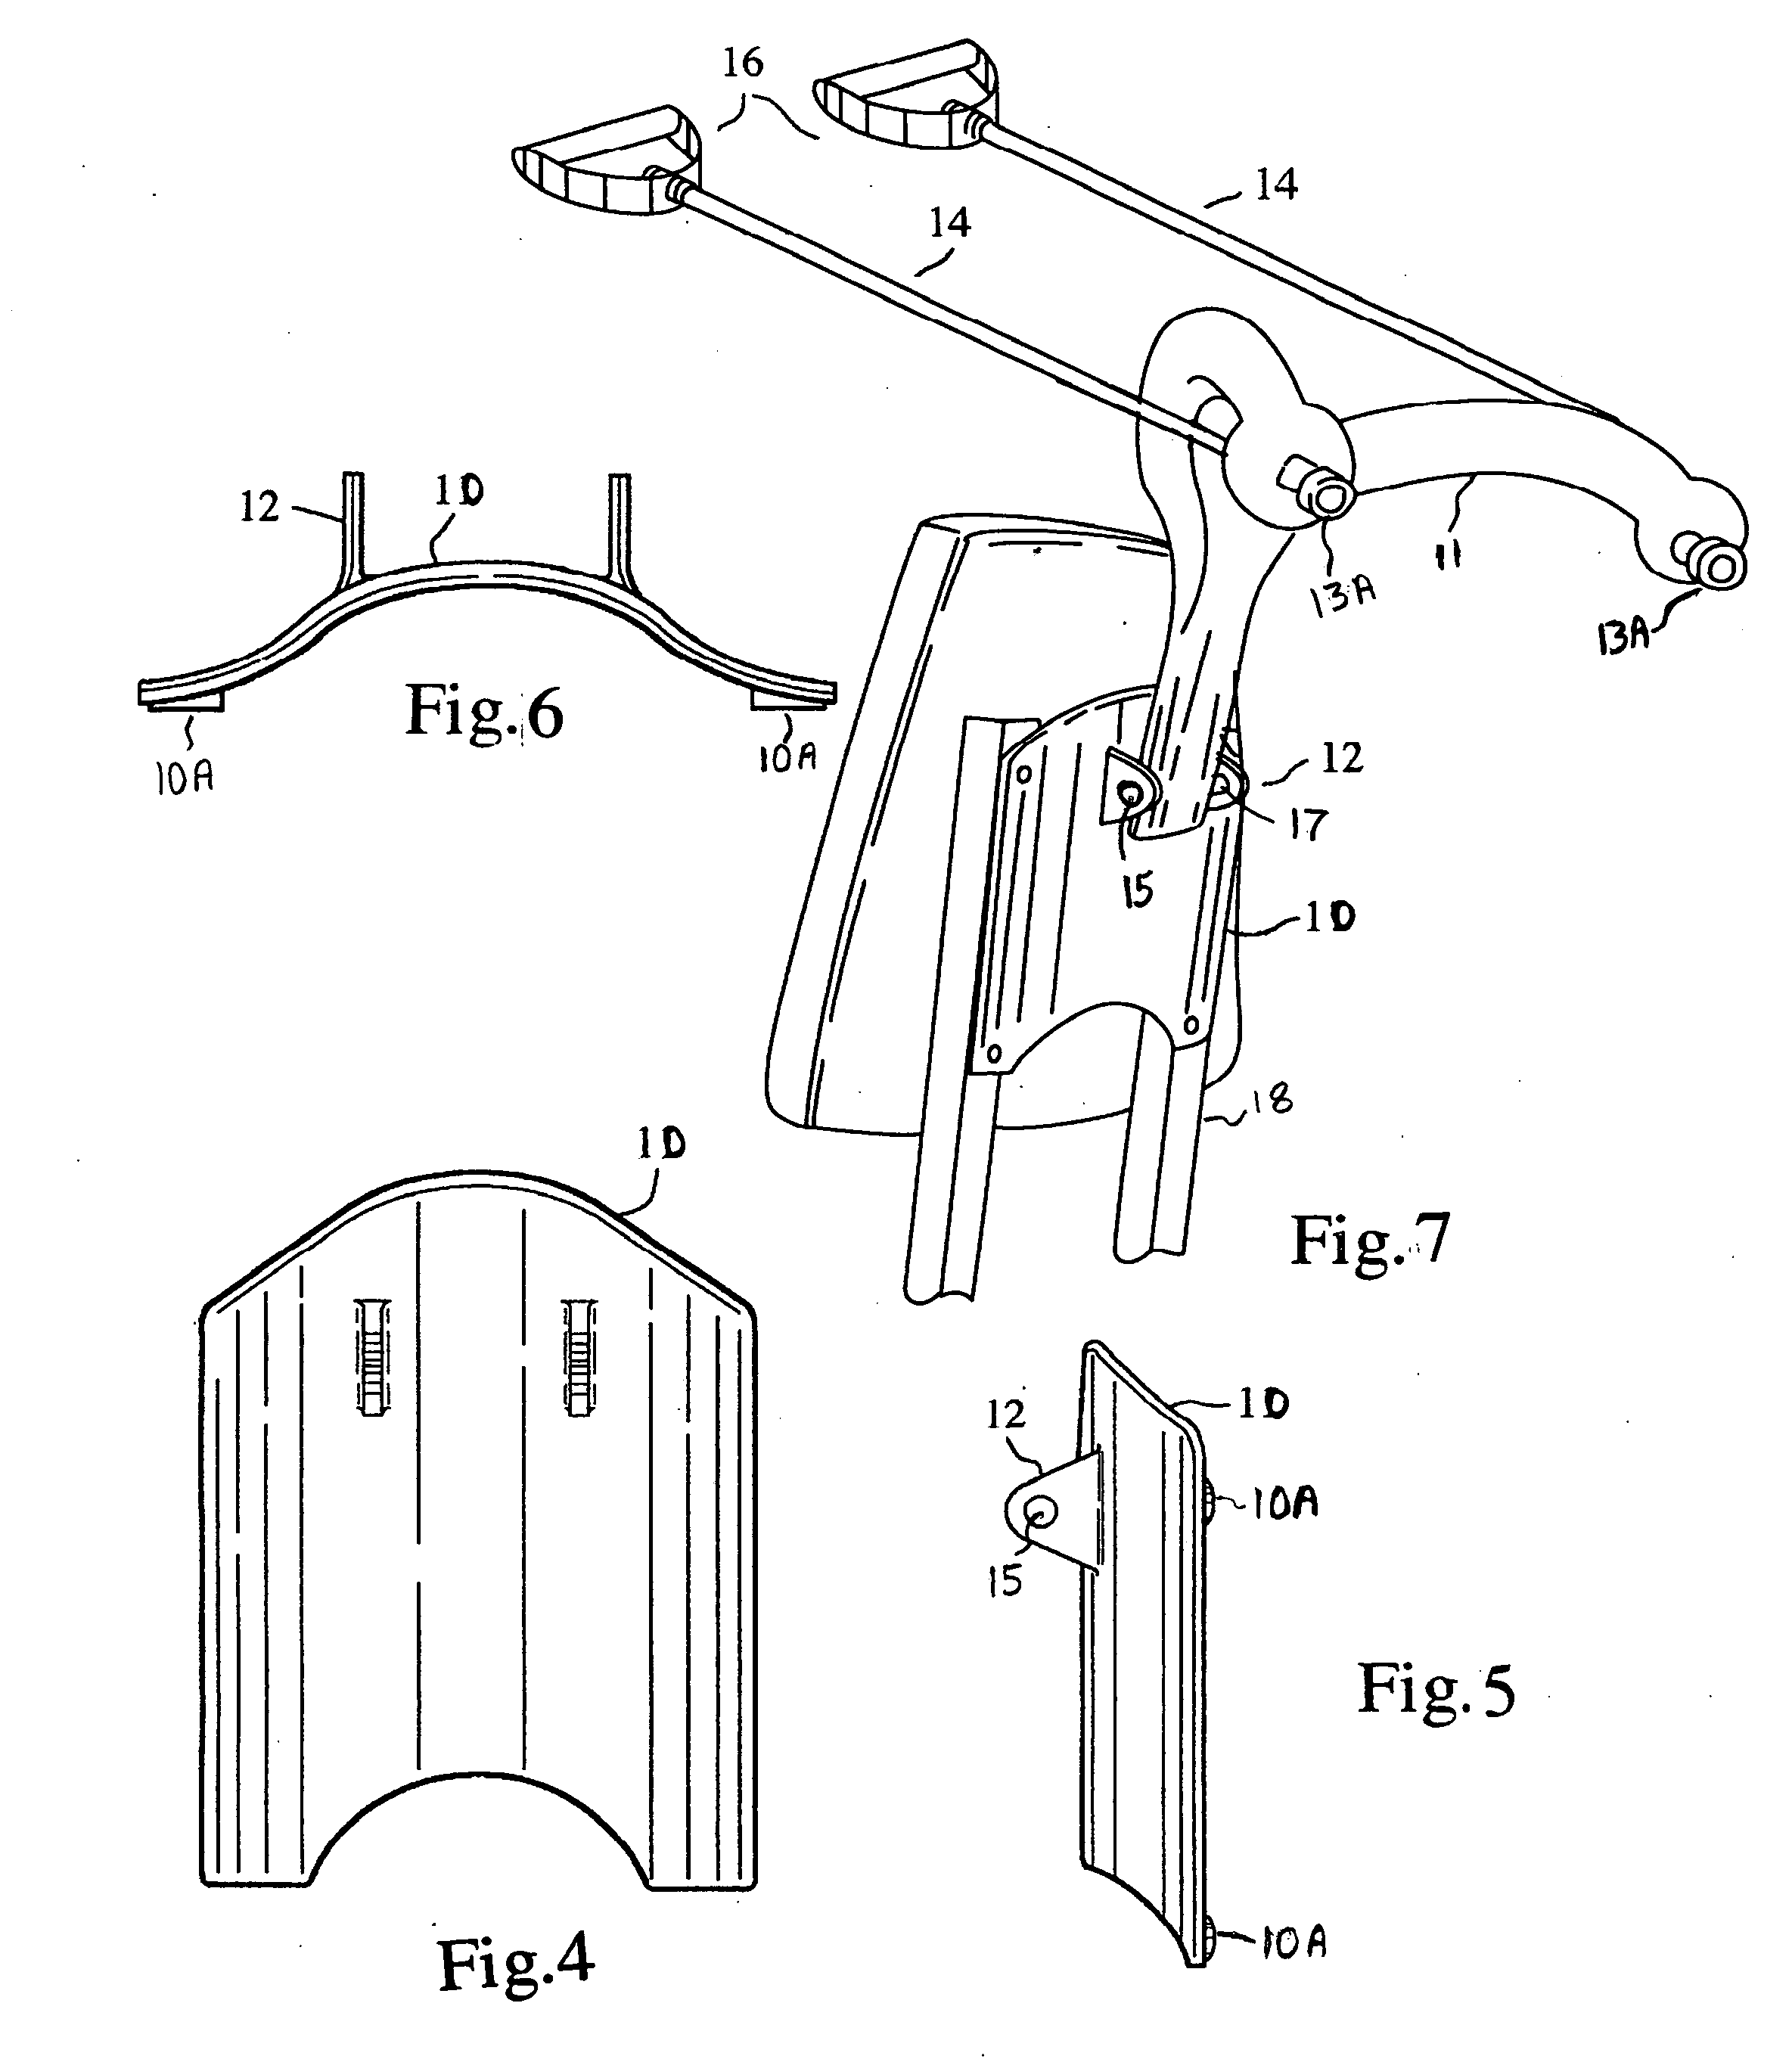 Device and method for exercise and rehabilitation